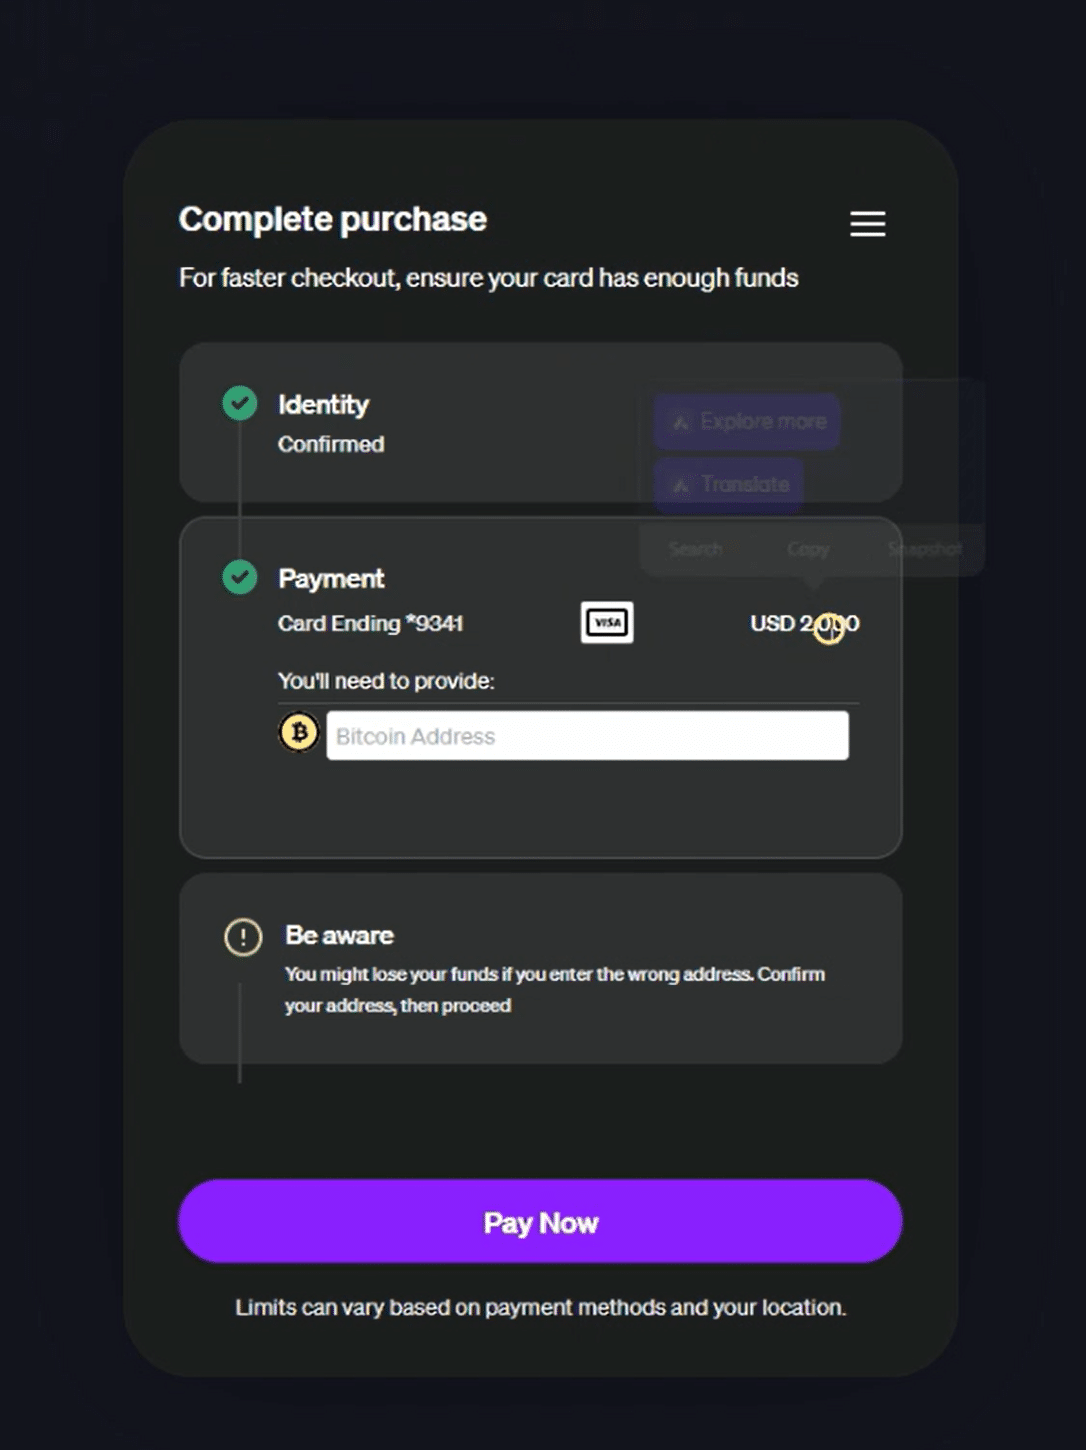 moonpay carding method complete purchase